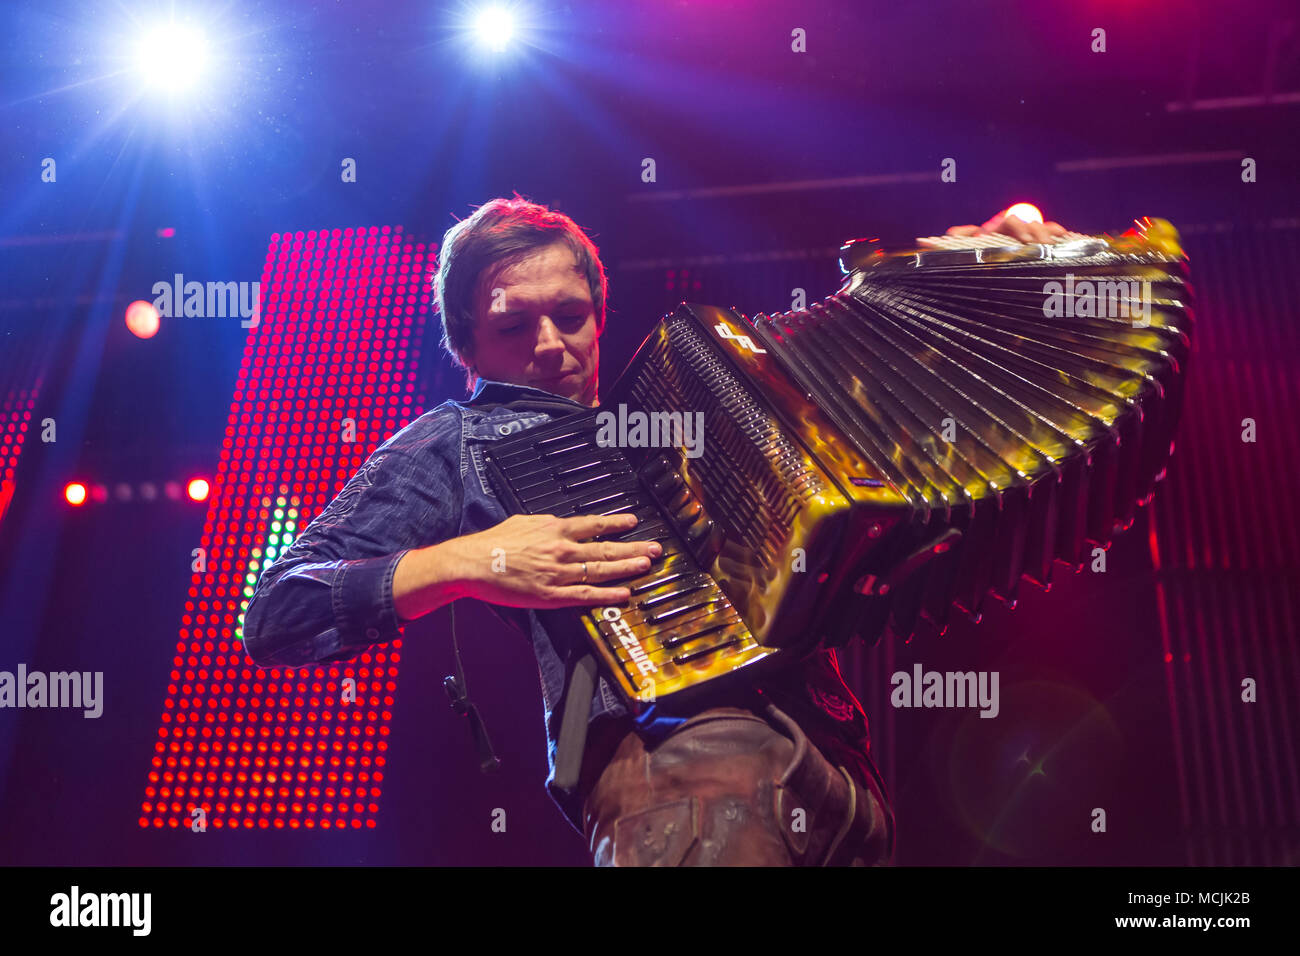 The German music group Dorfrocker with Markus Thomann on accordion live at  the 16th Schlager Nacht in Luzern, Switzerland Stock Photo - Alamy